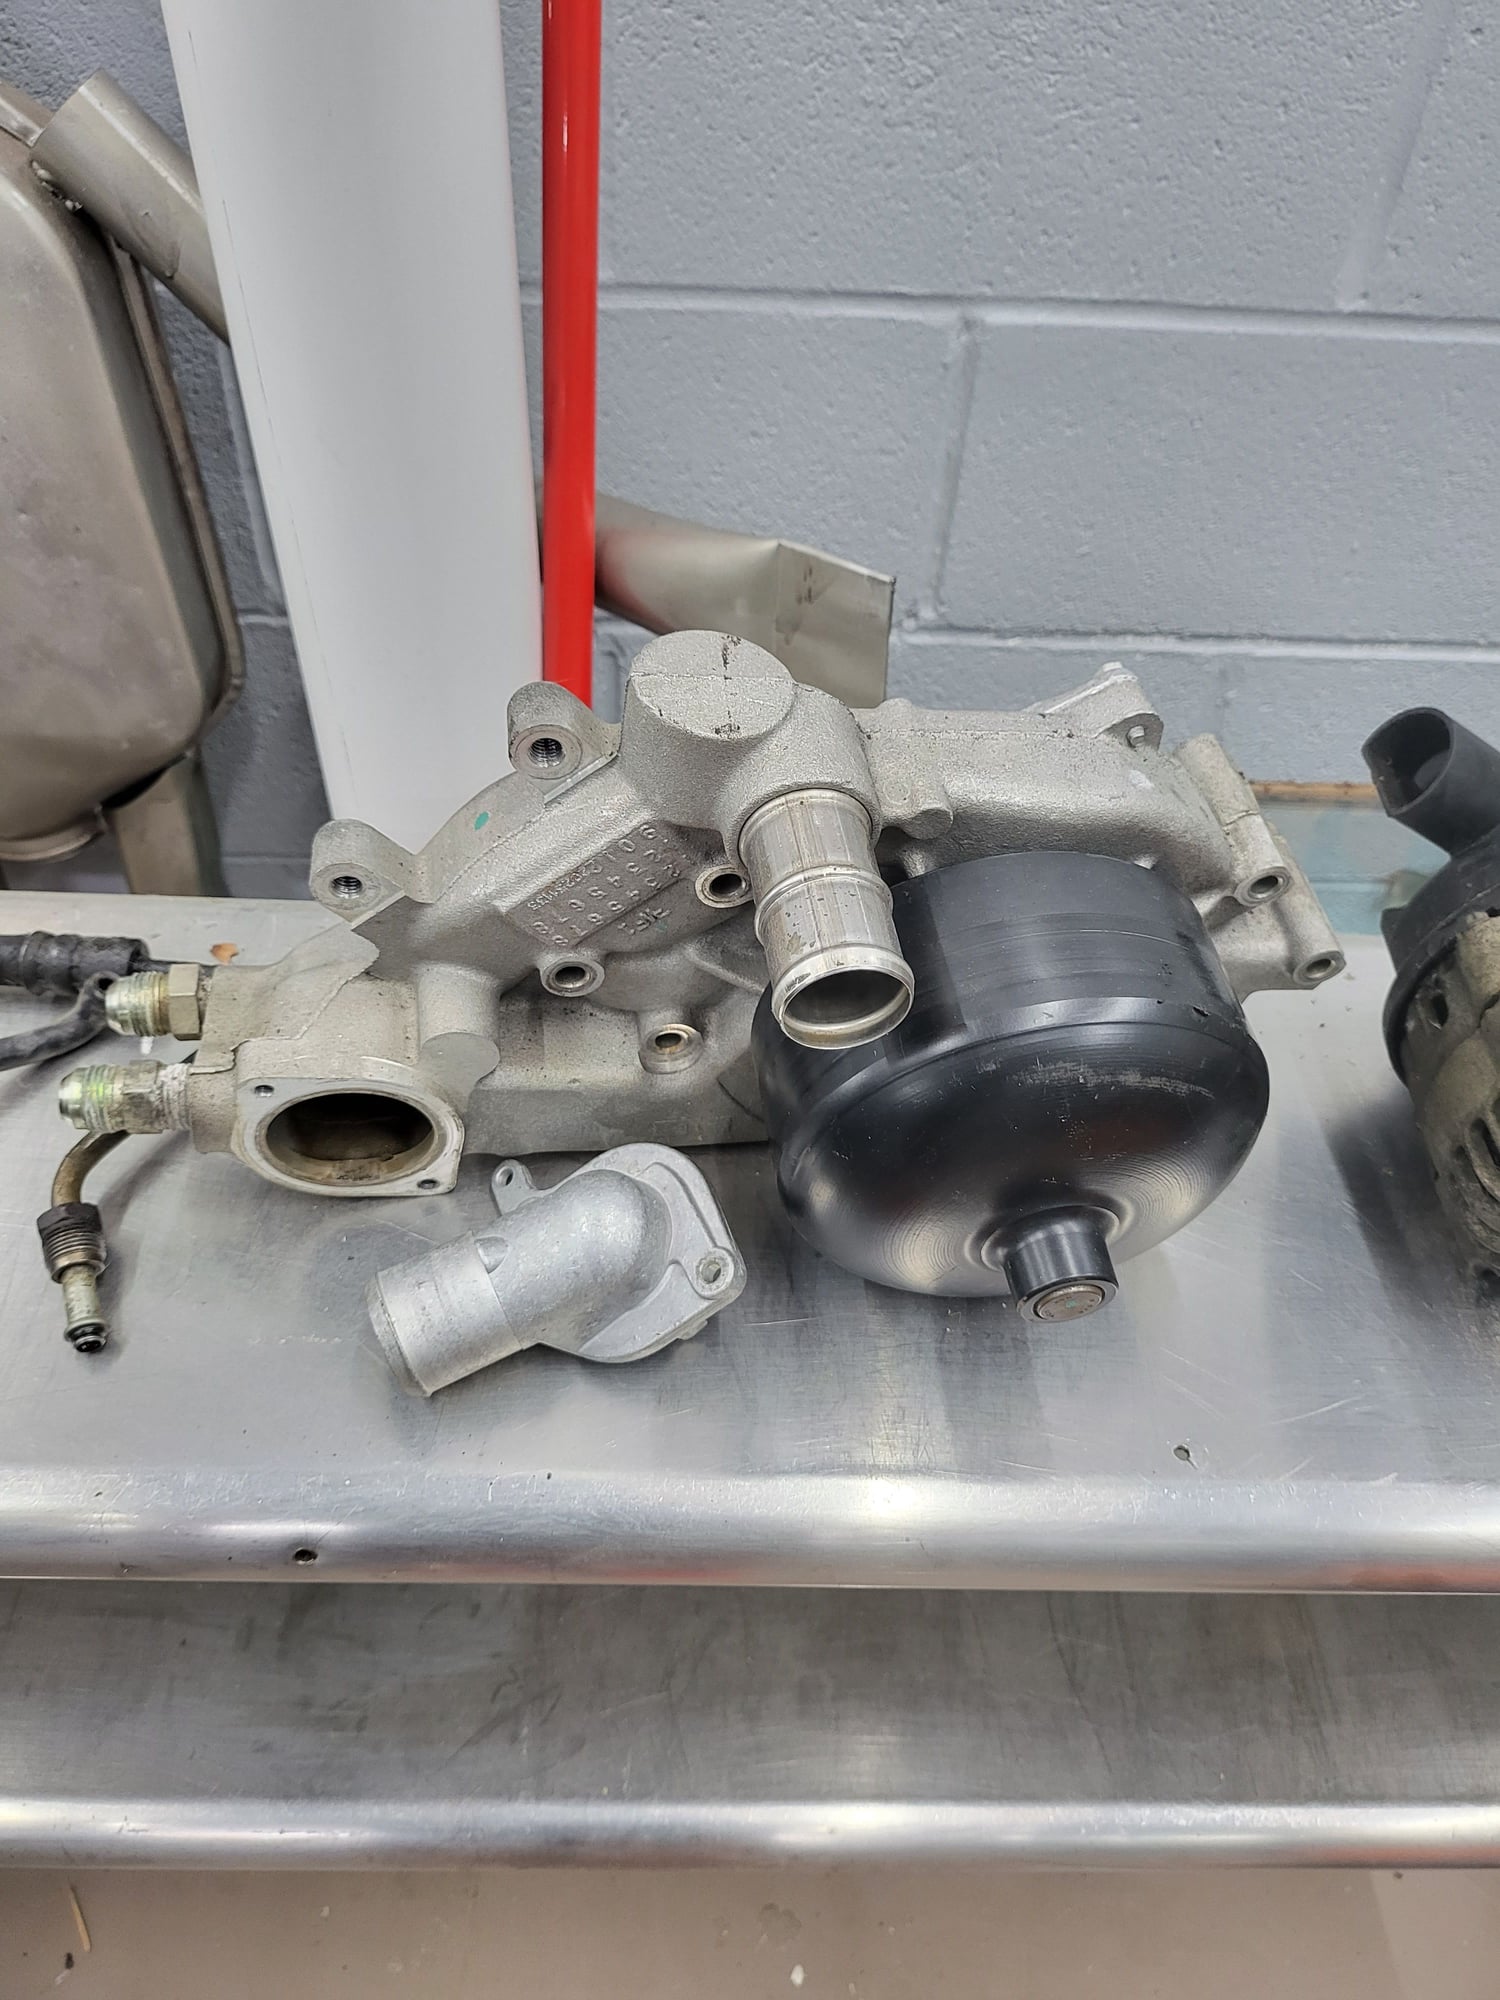 Engine - Intake/Fuel - garage clean out - Used - 0  All Models - Cookeville, TN 38501, United States